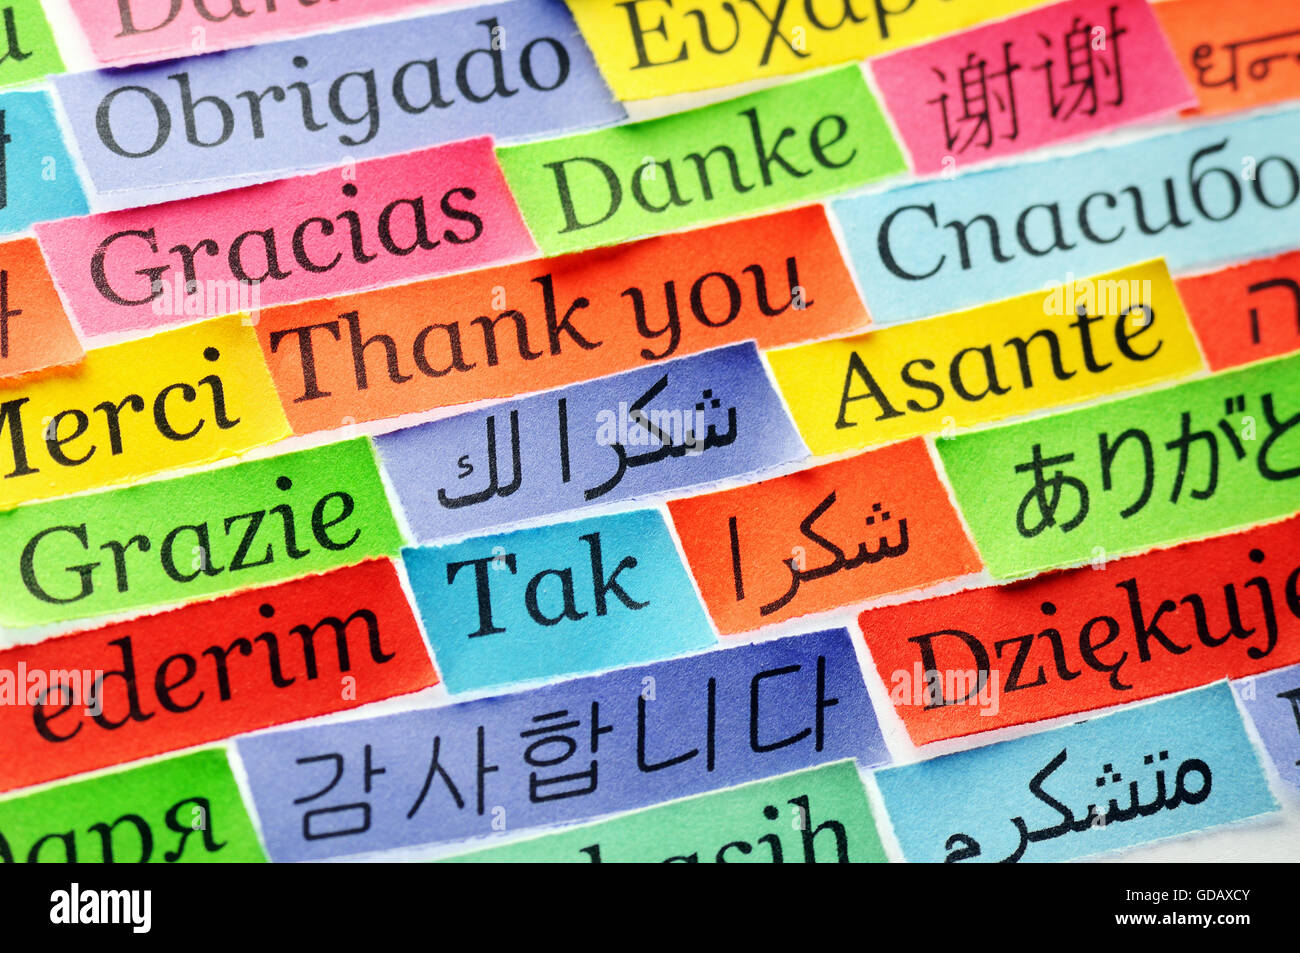 Thank You Word Cloud printed on colorful paper different languages Stock Photo